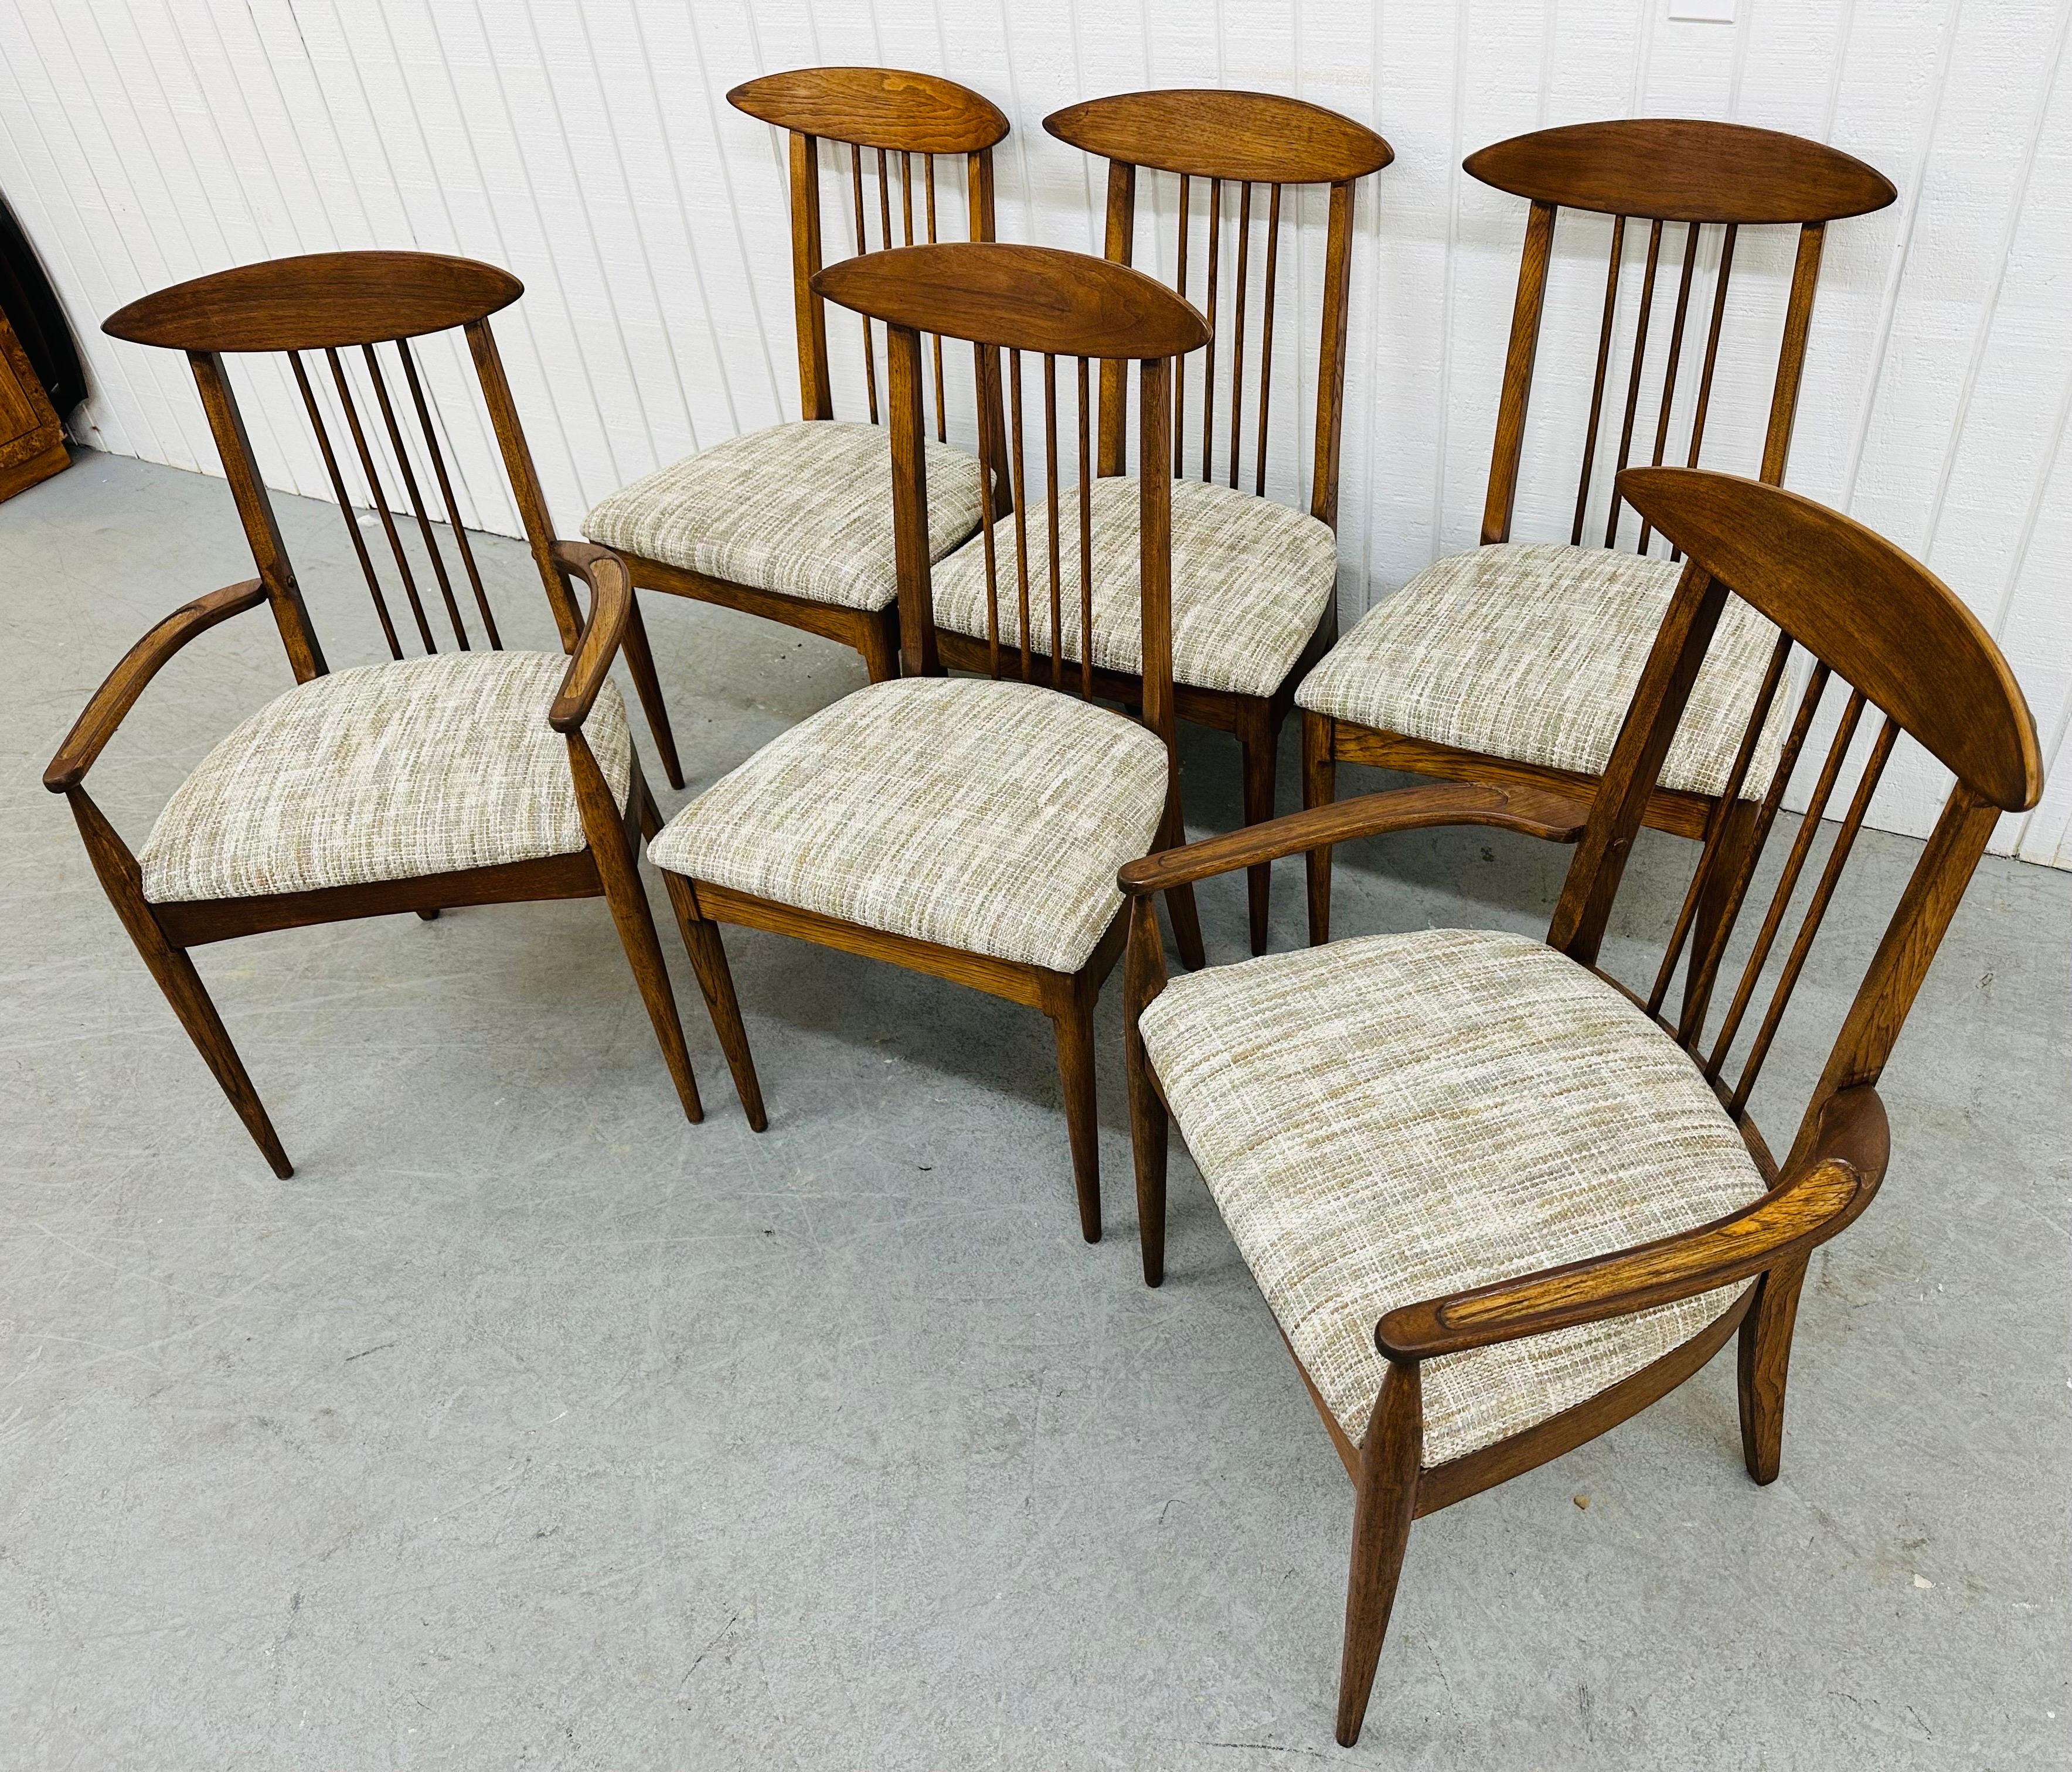 This listing is for a set of six Mid-Century Modern Broyhill Sculptra Walnut Dining Chairs. Featuring a comb back design, two arm chairs, four straight chairs, new upholstered seats, and a beautiful walnut finish. This is an exceptional combination